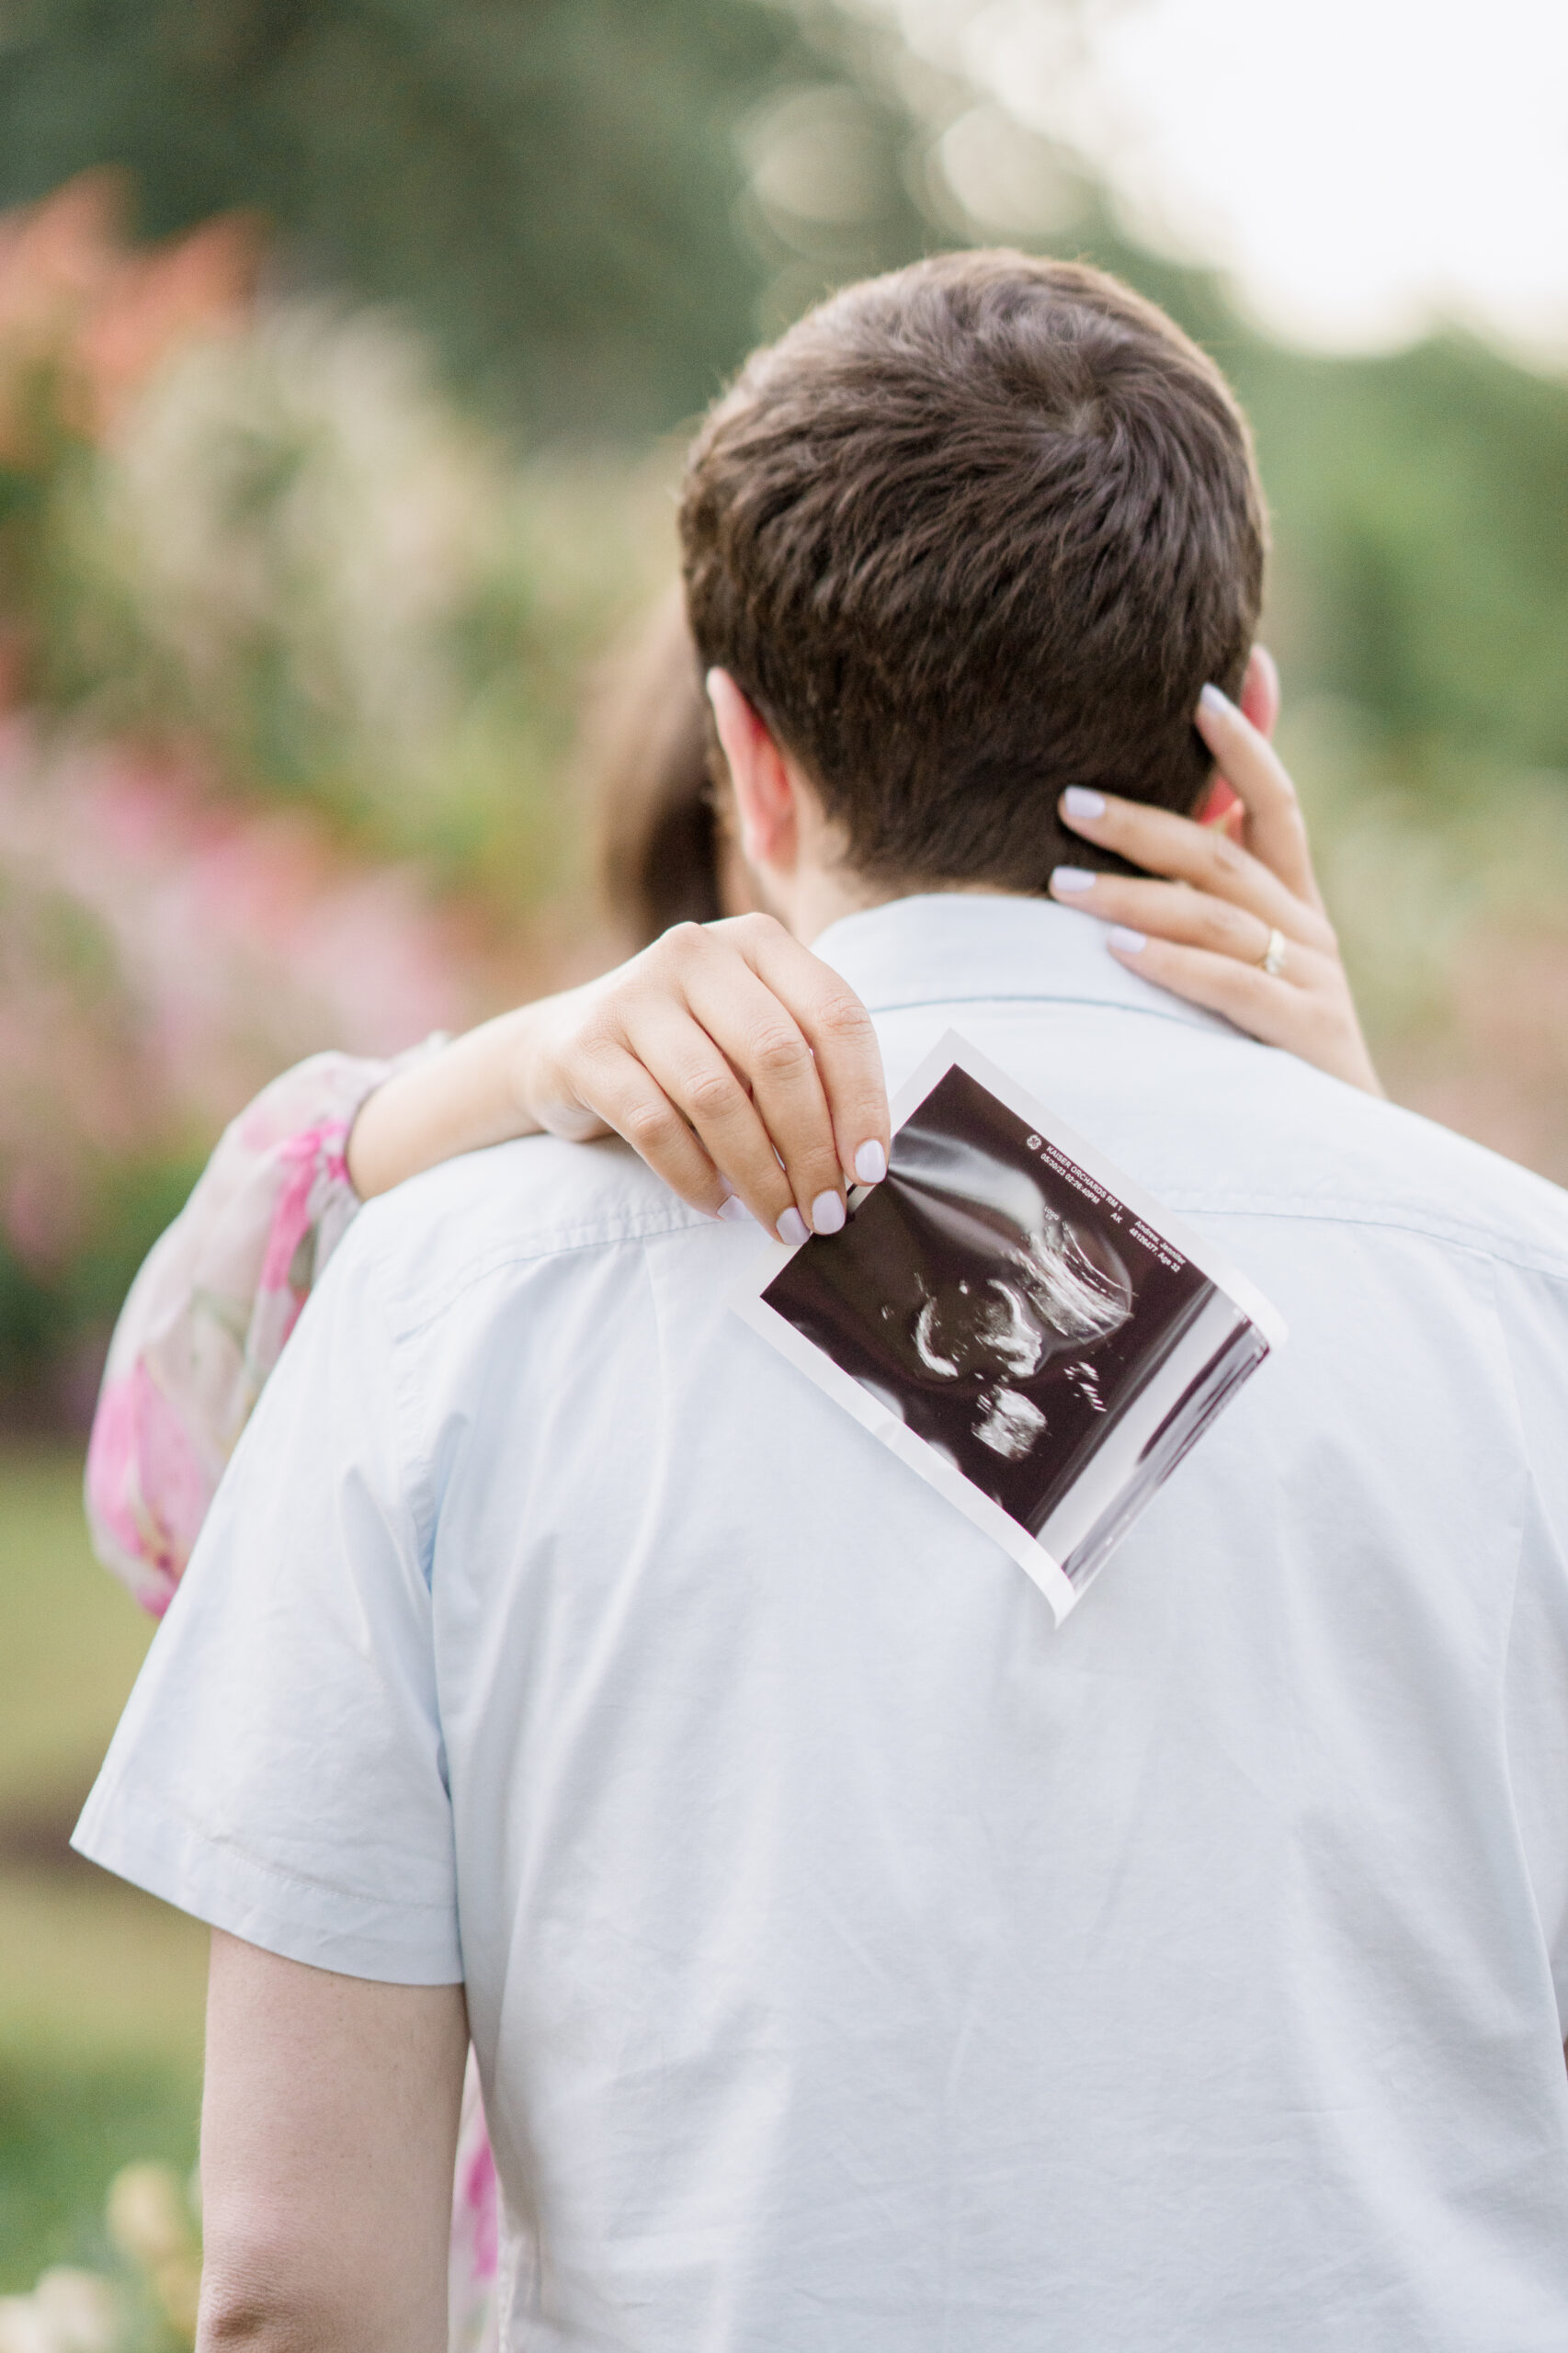 A pose with the mom holding an ultrasound photo behind her husband's back.